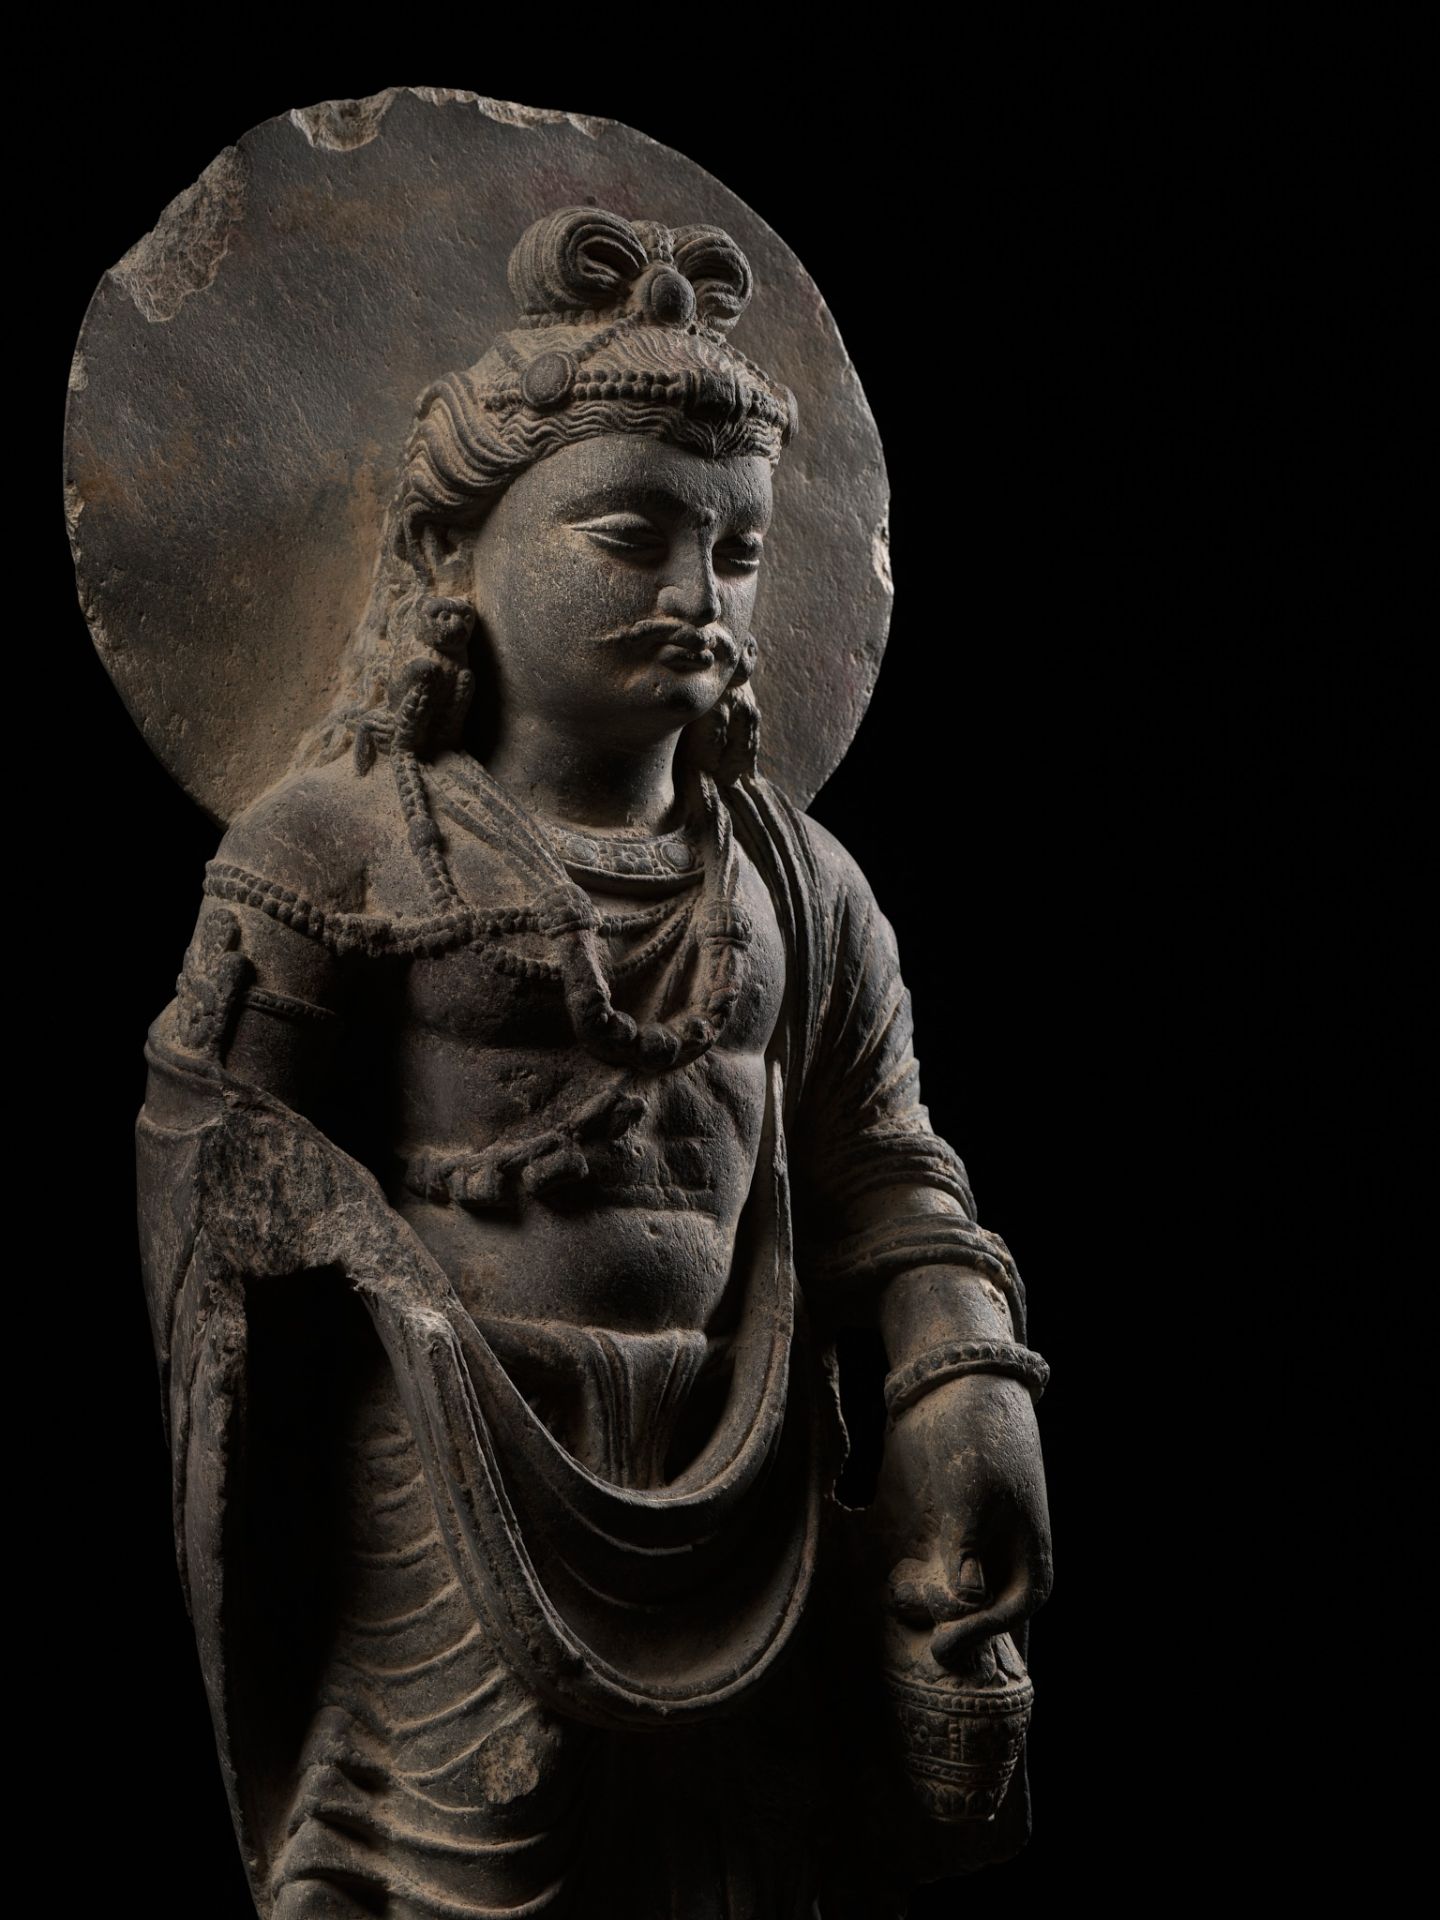 A LARGE SCHIST FIGURE OF MAITREYA WITH ATLAS, ANCIENT REGION OF GANDHARA - Image 9 of 12